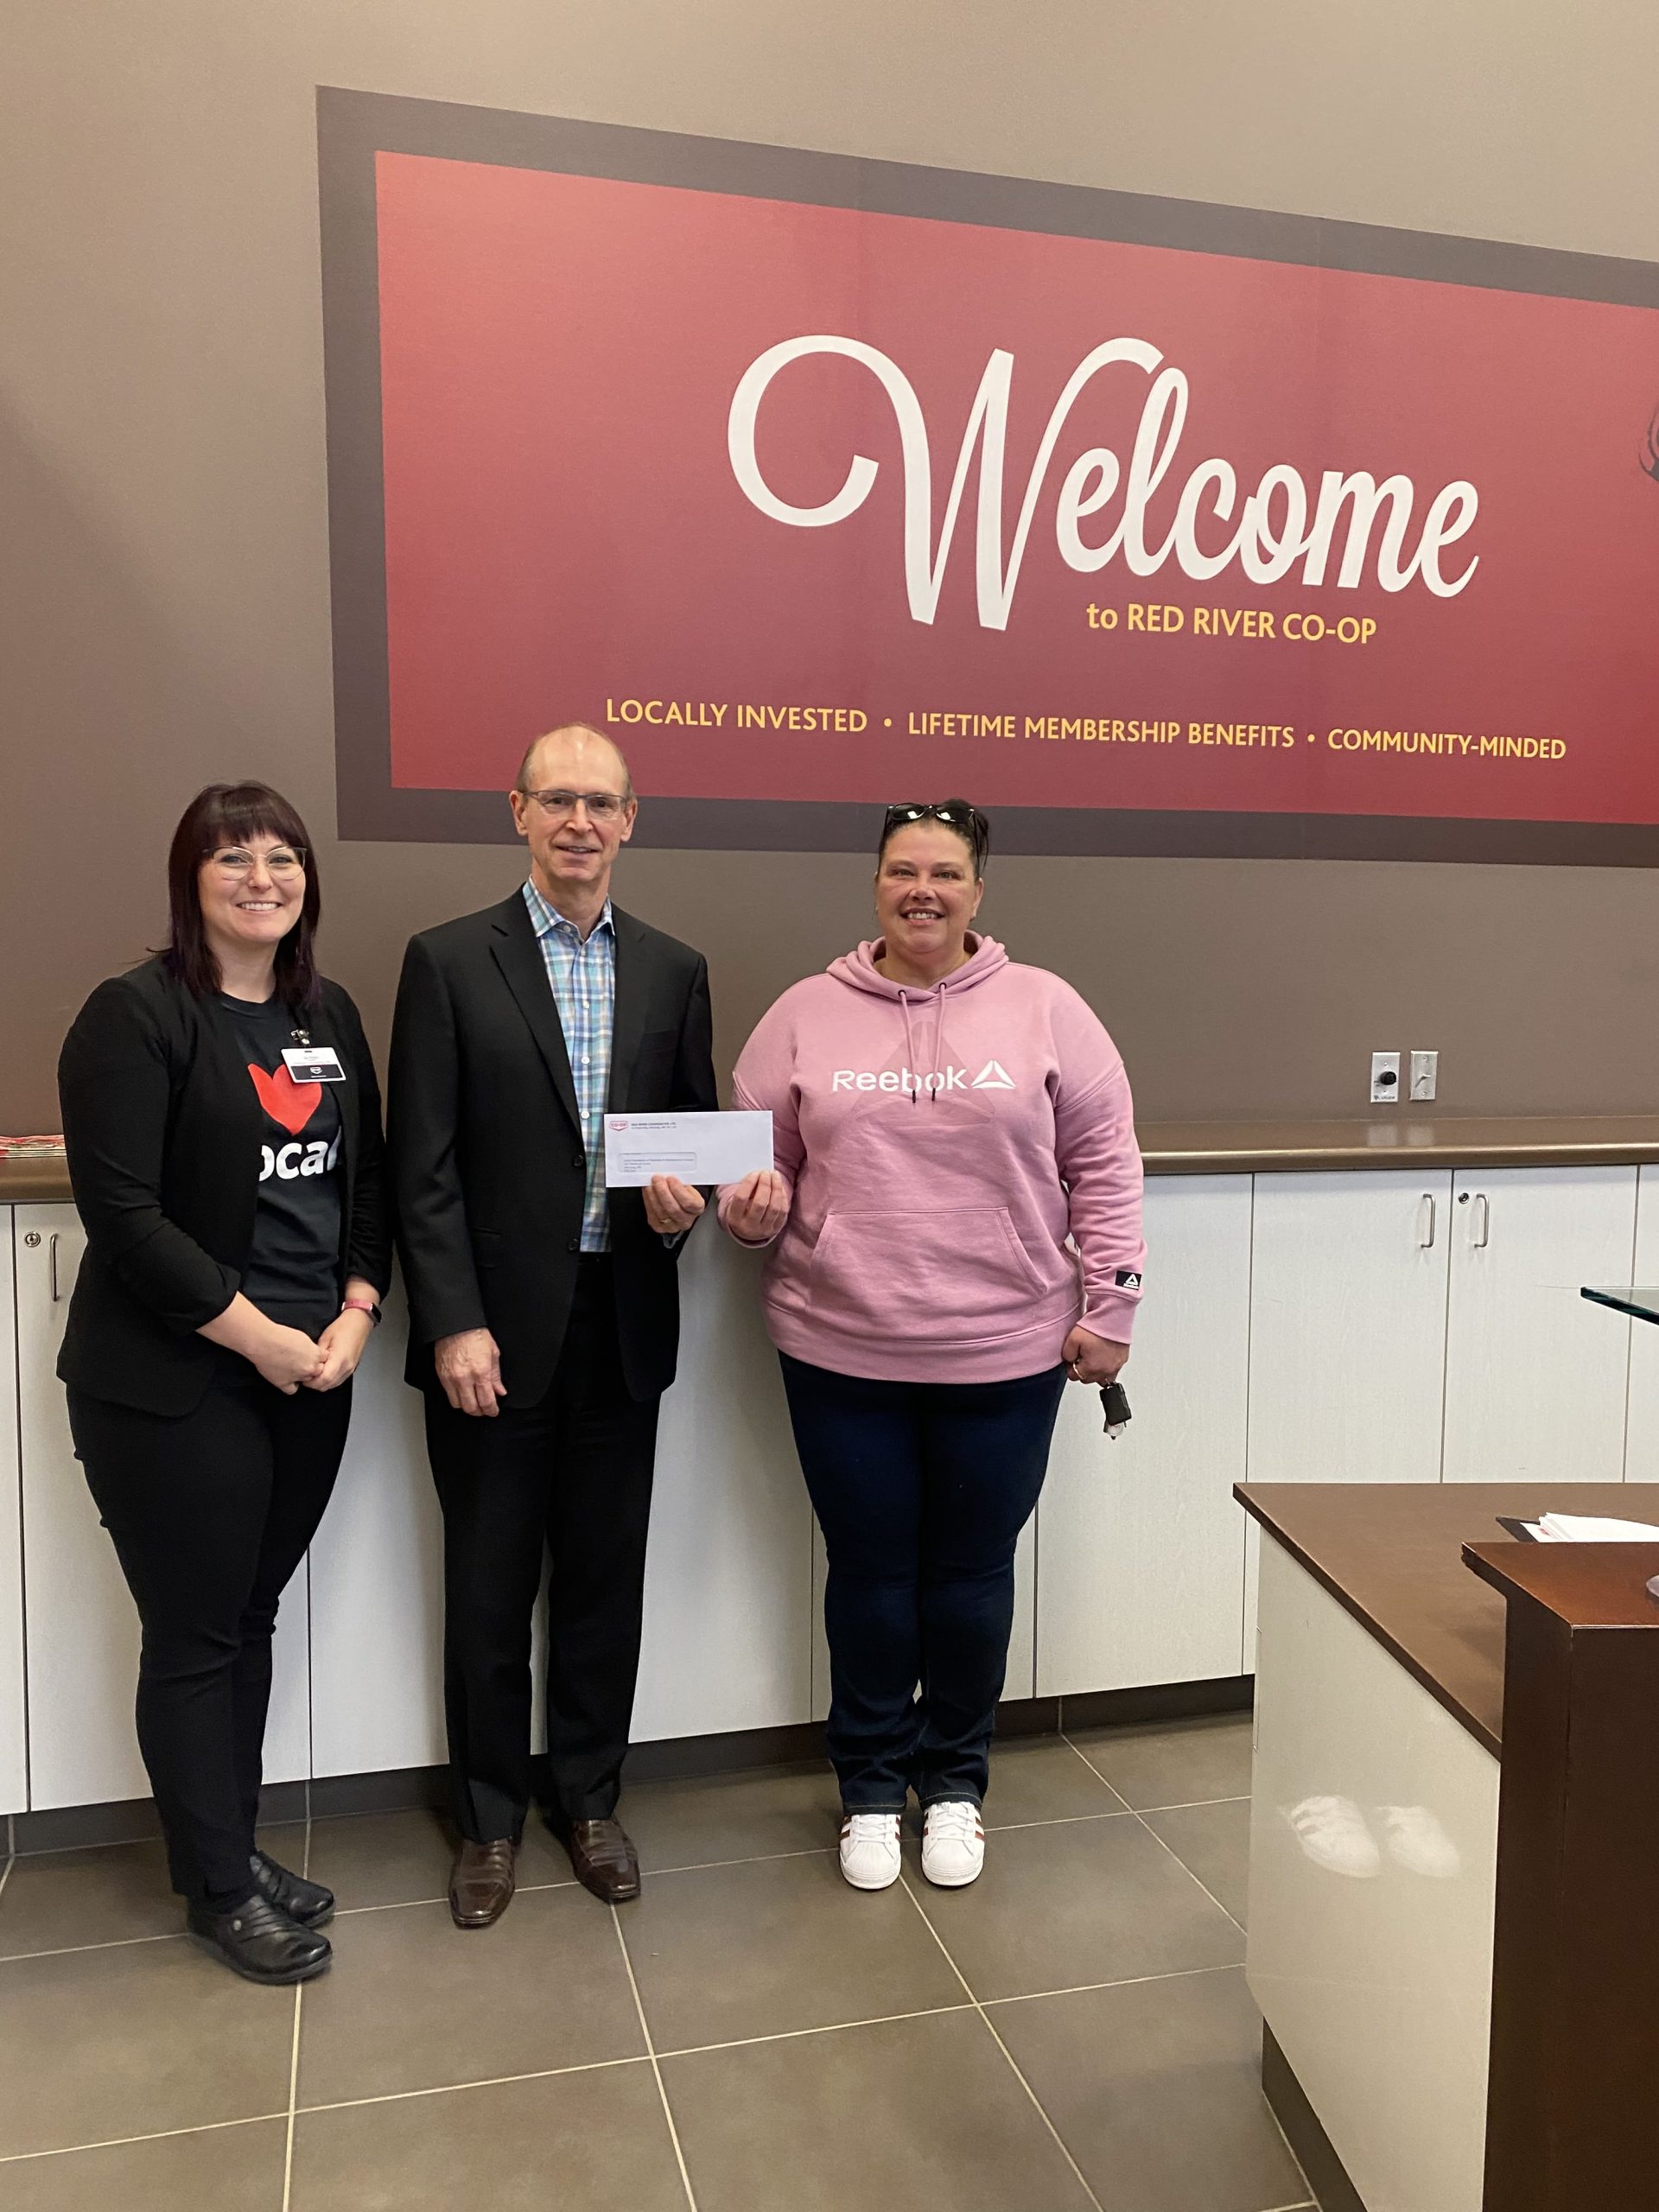 Red River Co-op Awards 2023 Community Grant to Lions Foundation for the Kidsight Vision Initiative